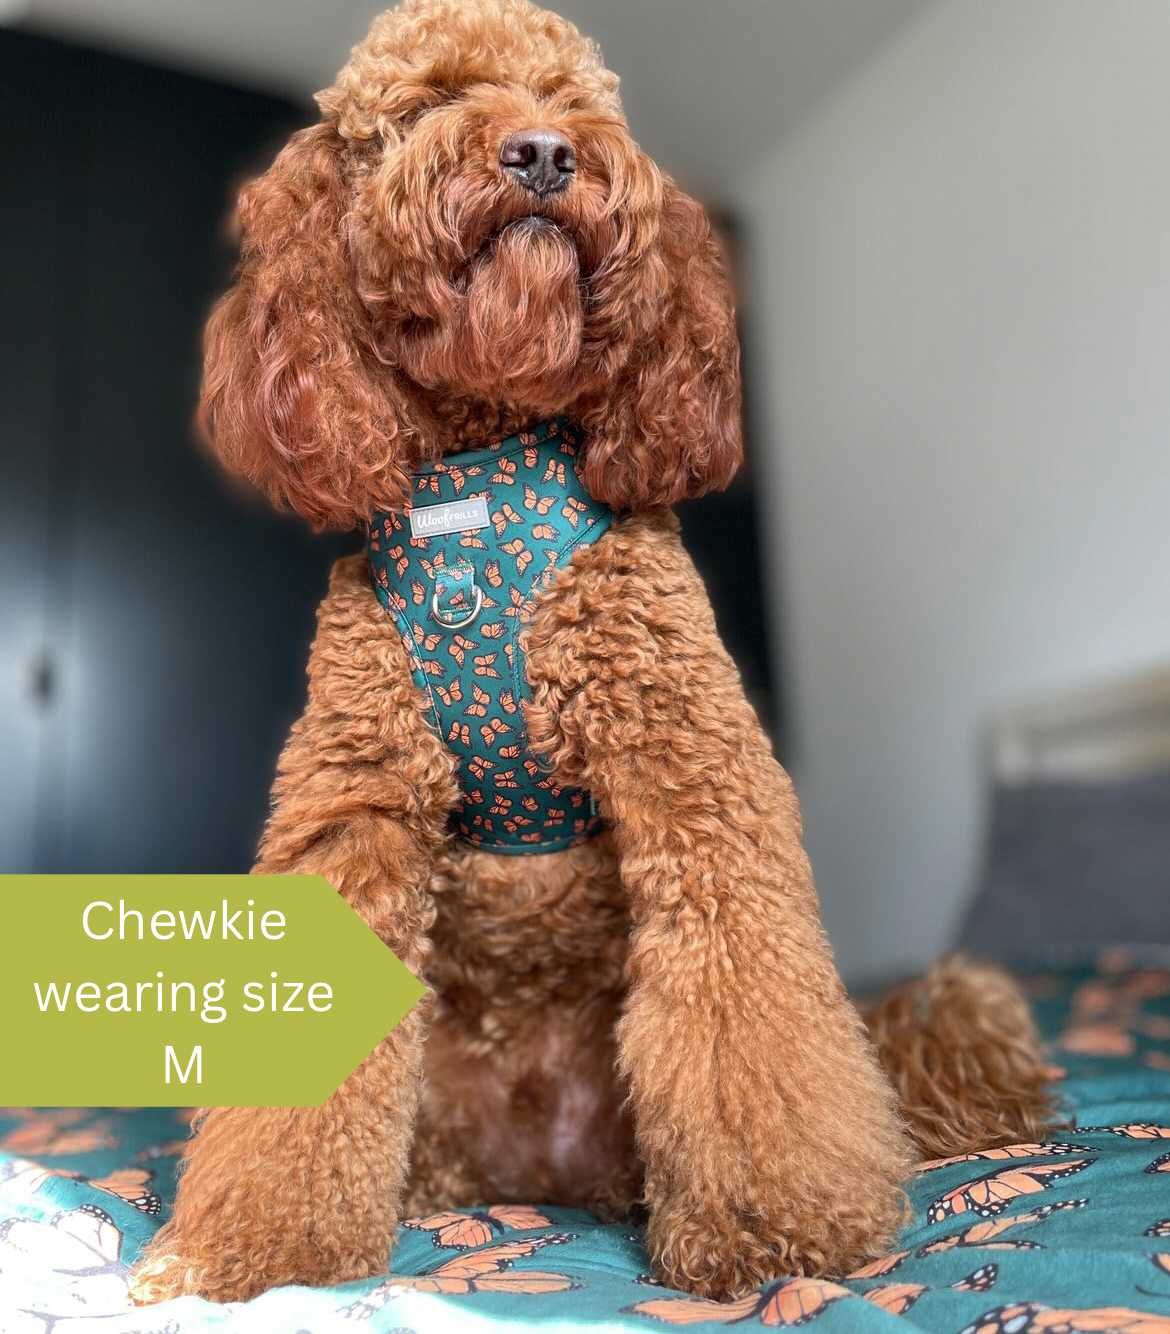 Cockapoo wearing a small dog harness